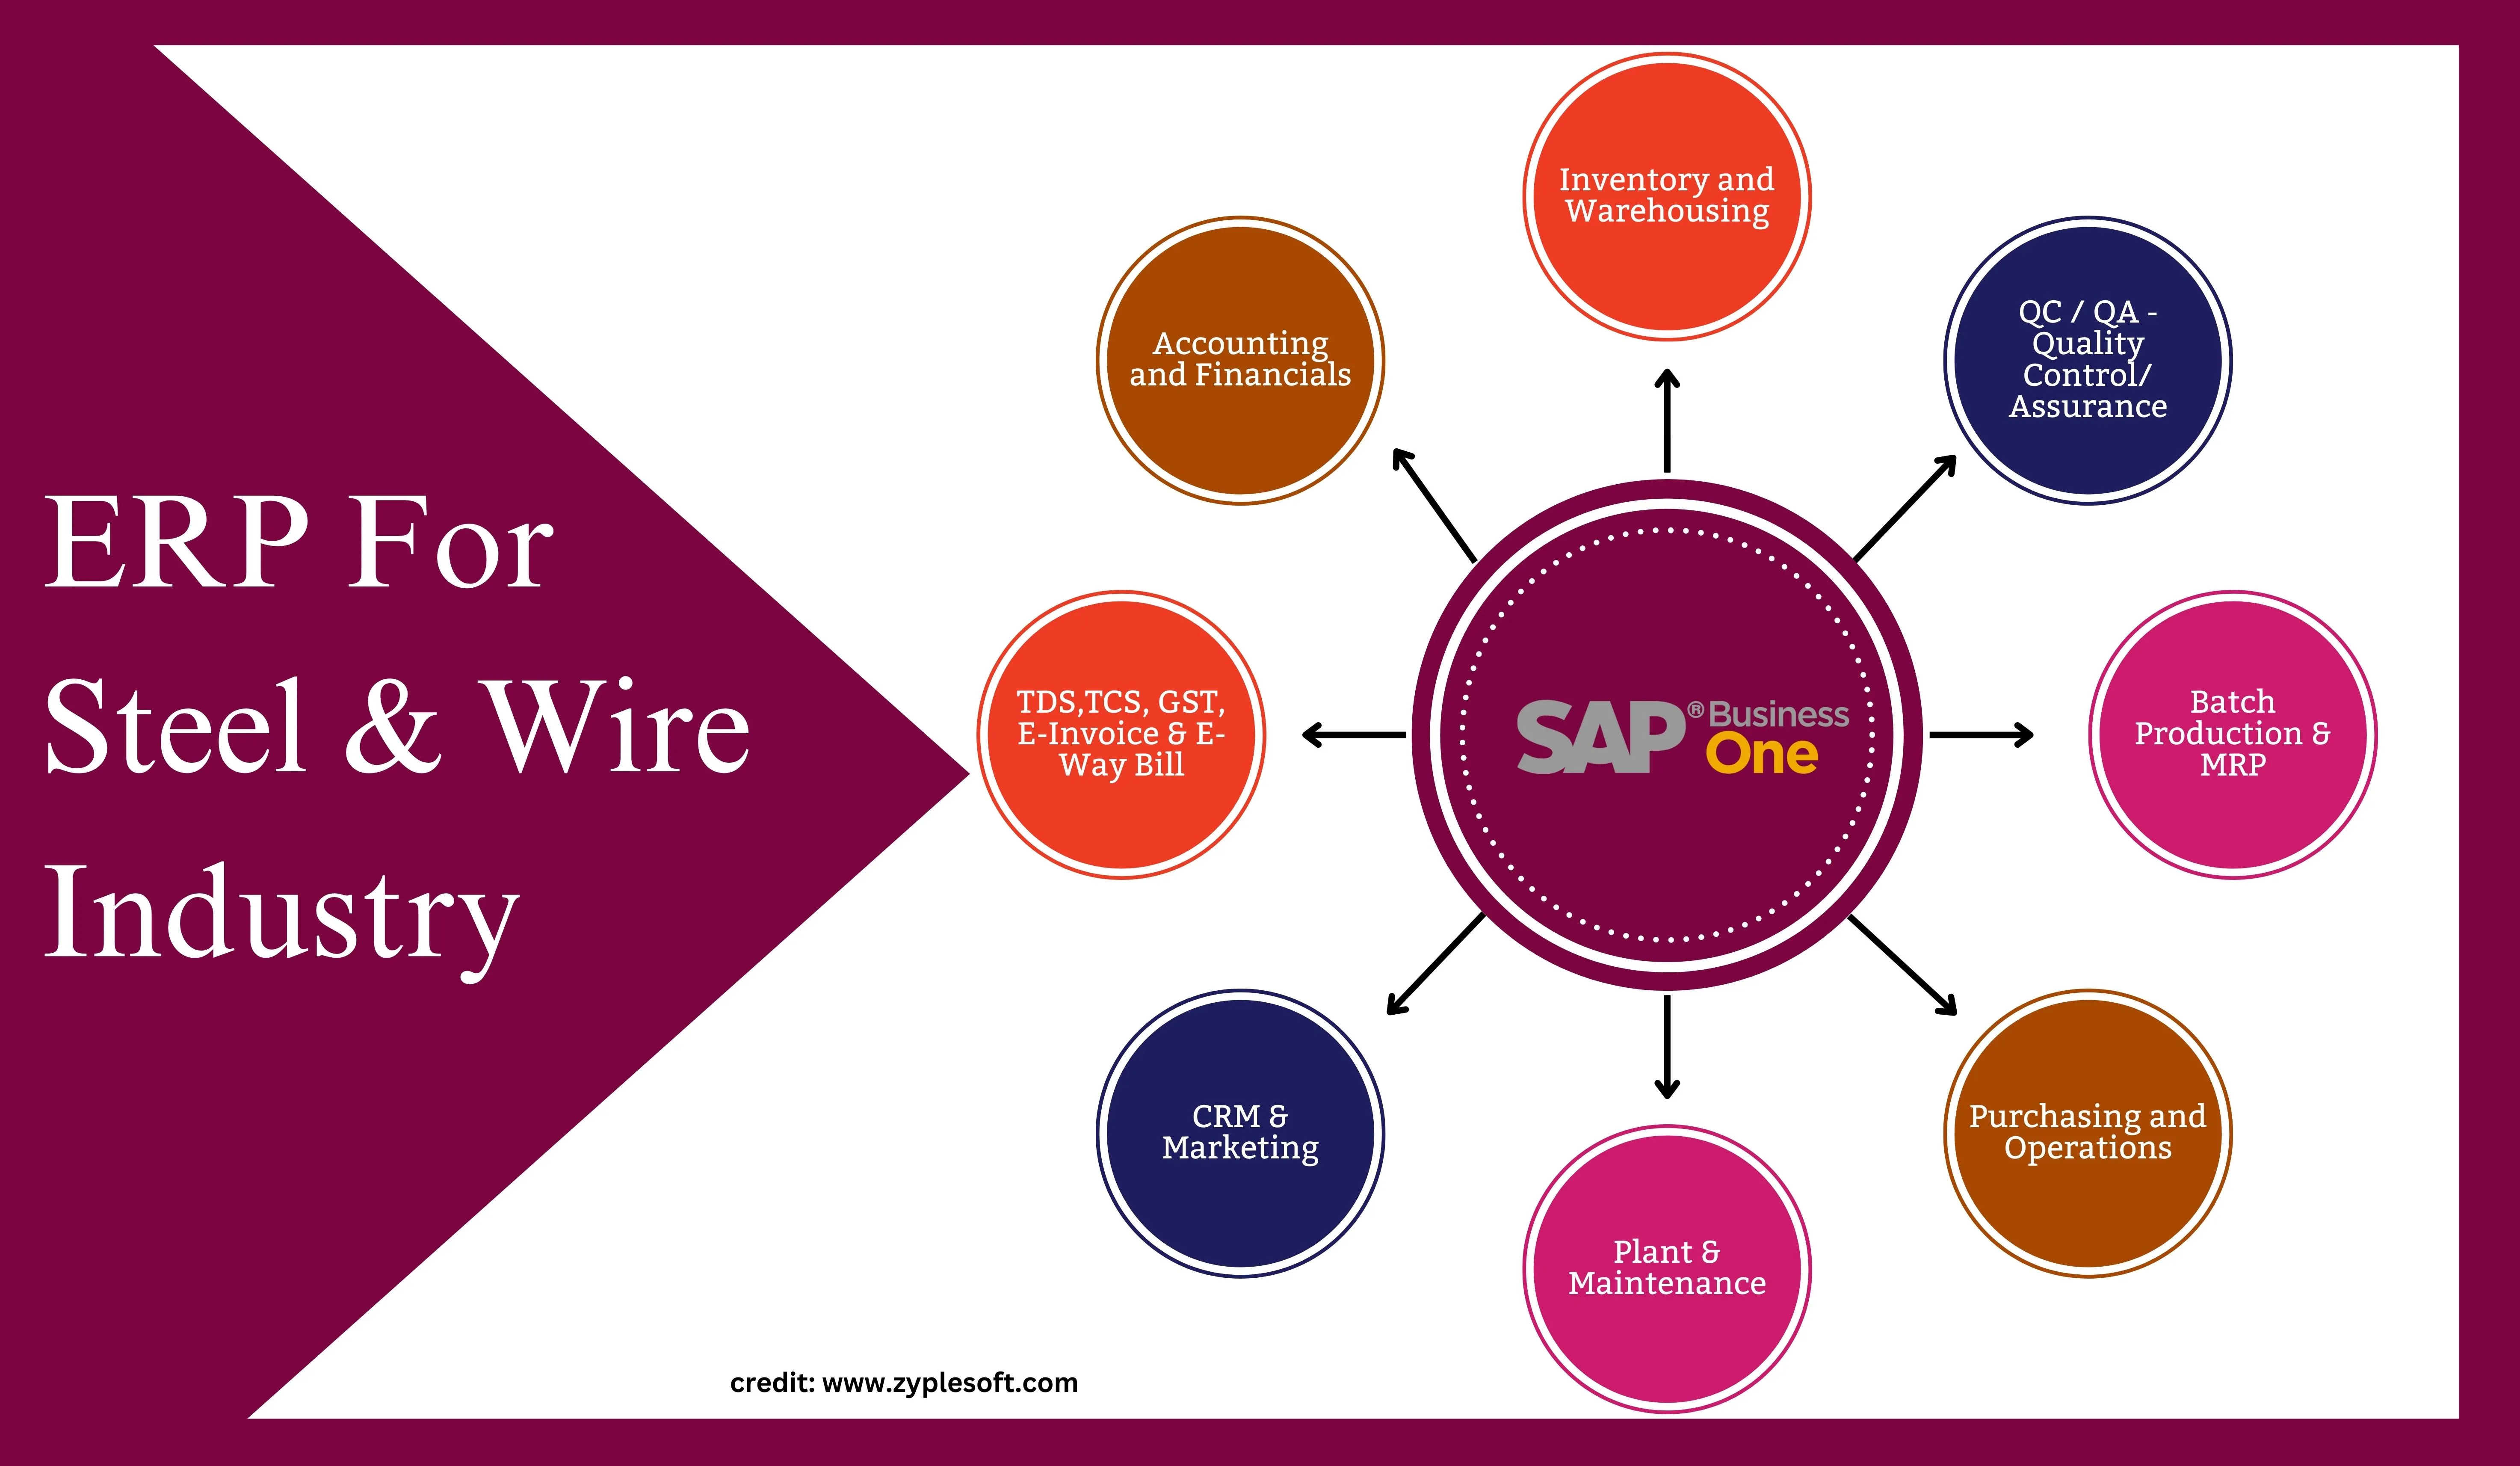 SAP Business One ERP for steel and wire industry